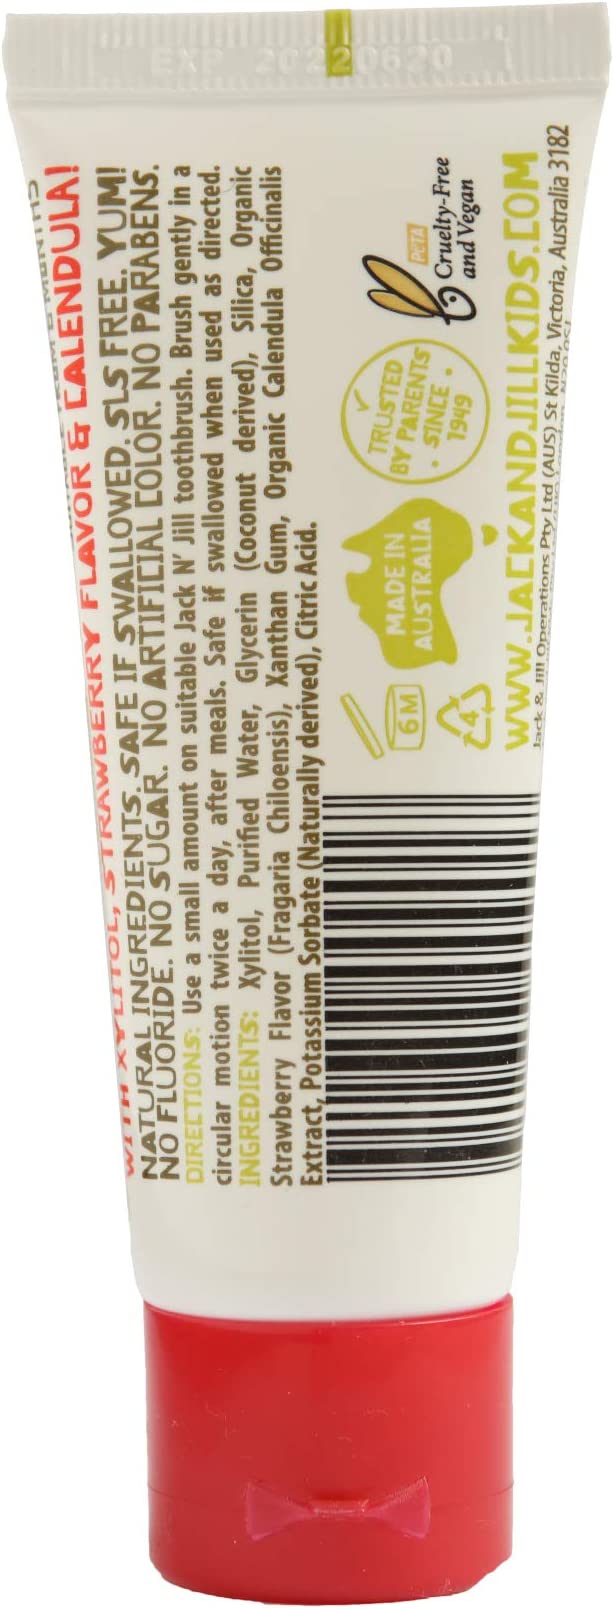 Jack n' Jill - Kids Natural Toothpaste 50g - STRAWBERRY - The Bare Theory